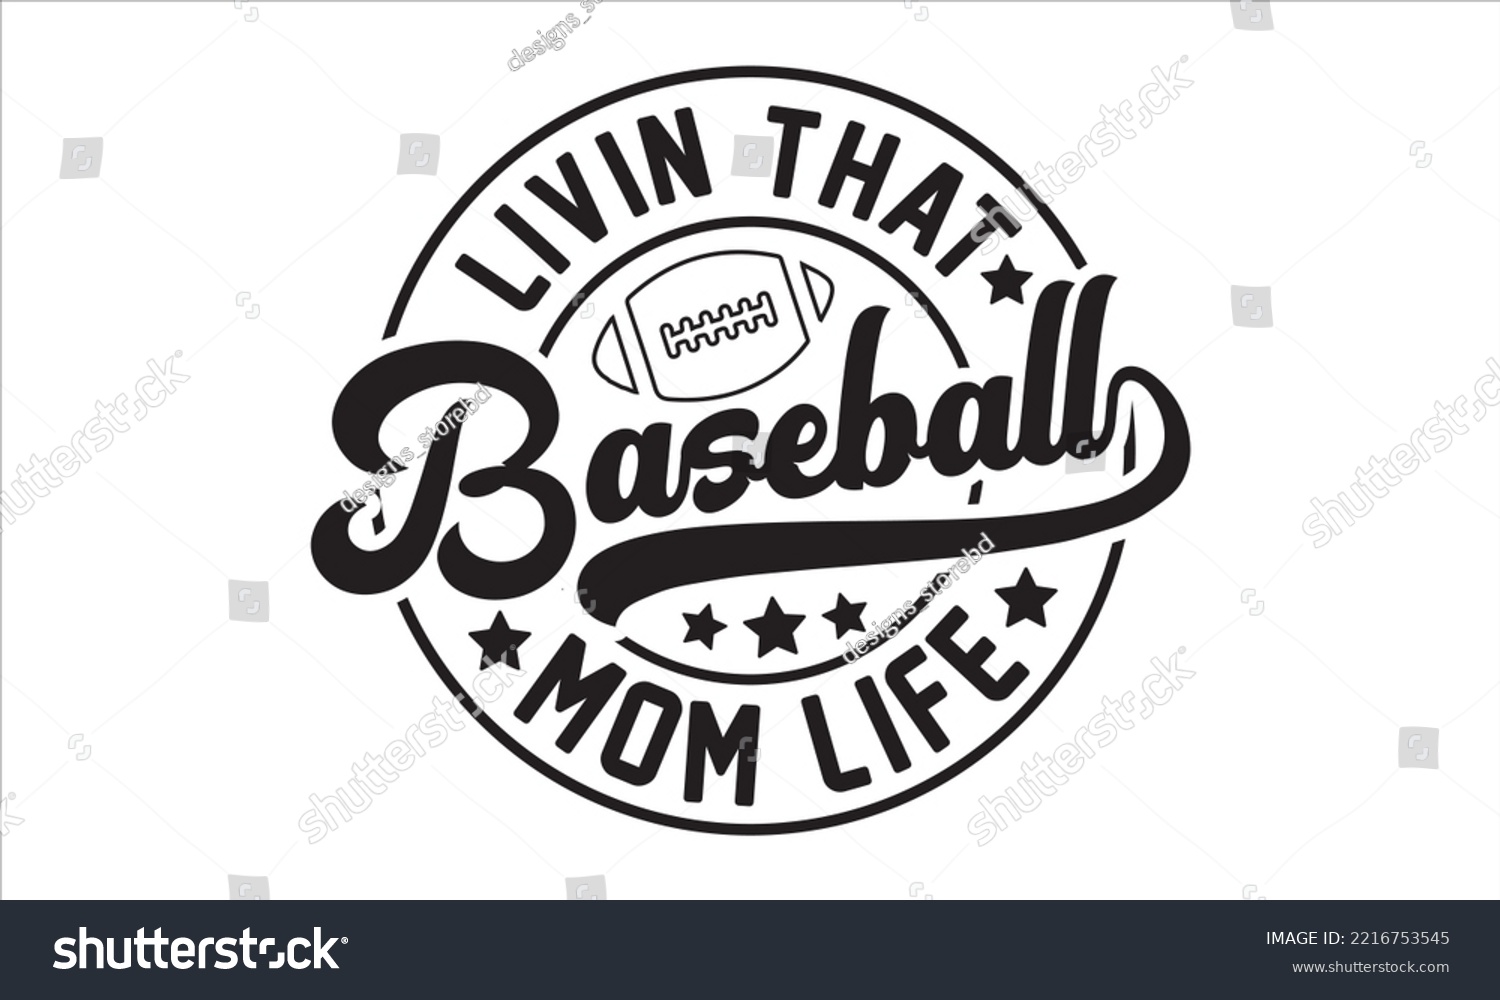 SVG of Livin that baseball mom life SVG,  baseball svg, baseball shirt, softball svg, softball mom life, Baseball svg bundle, Files for Cutting Typography Circuit and Silhouette, digital download Dxf, png svg